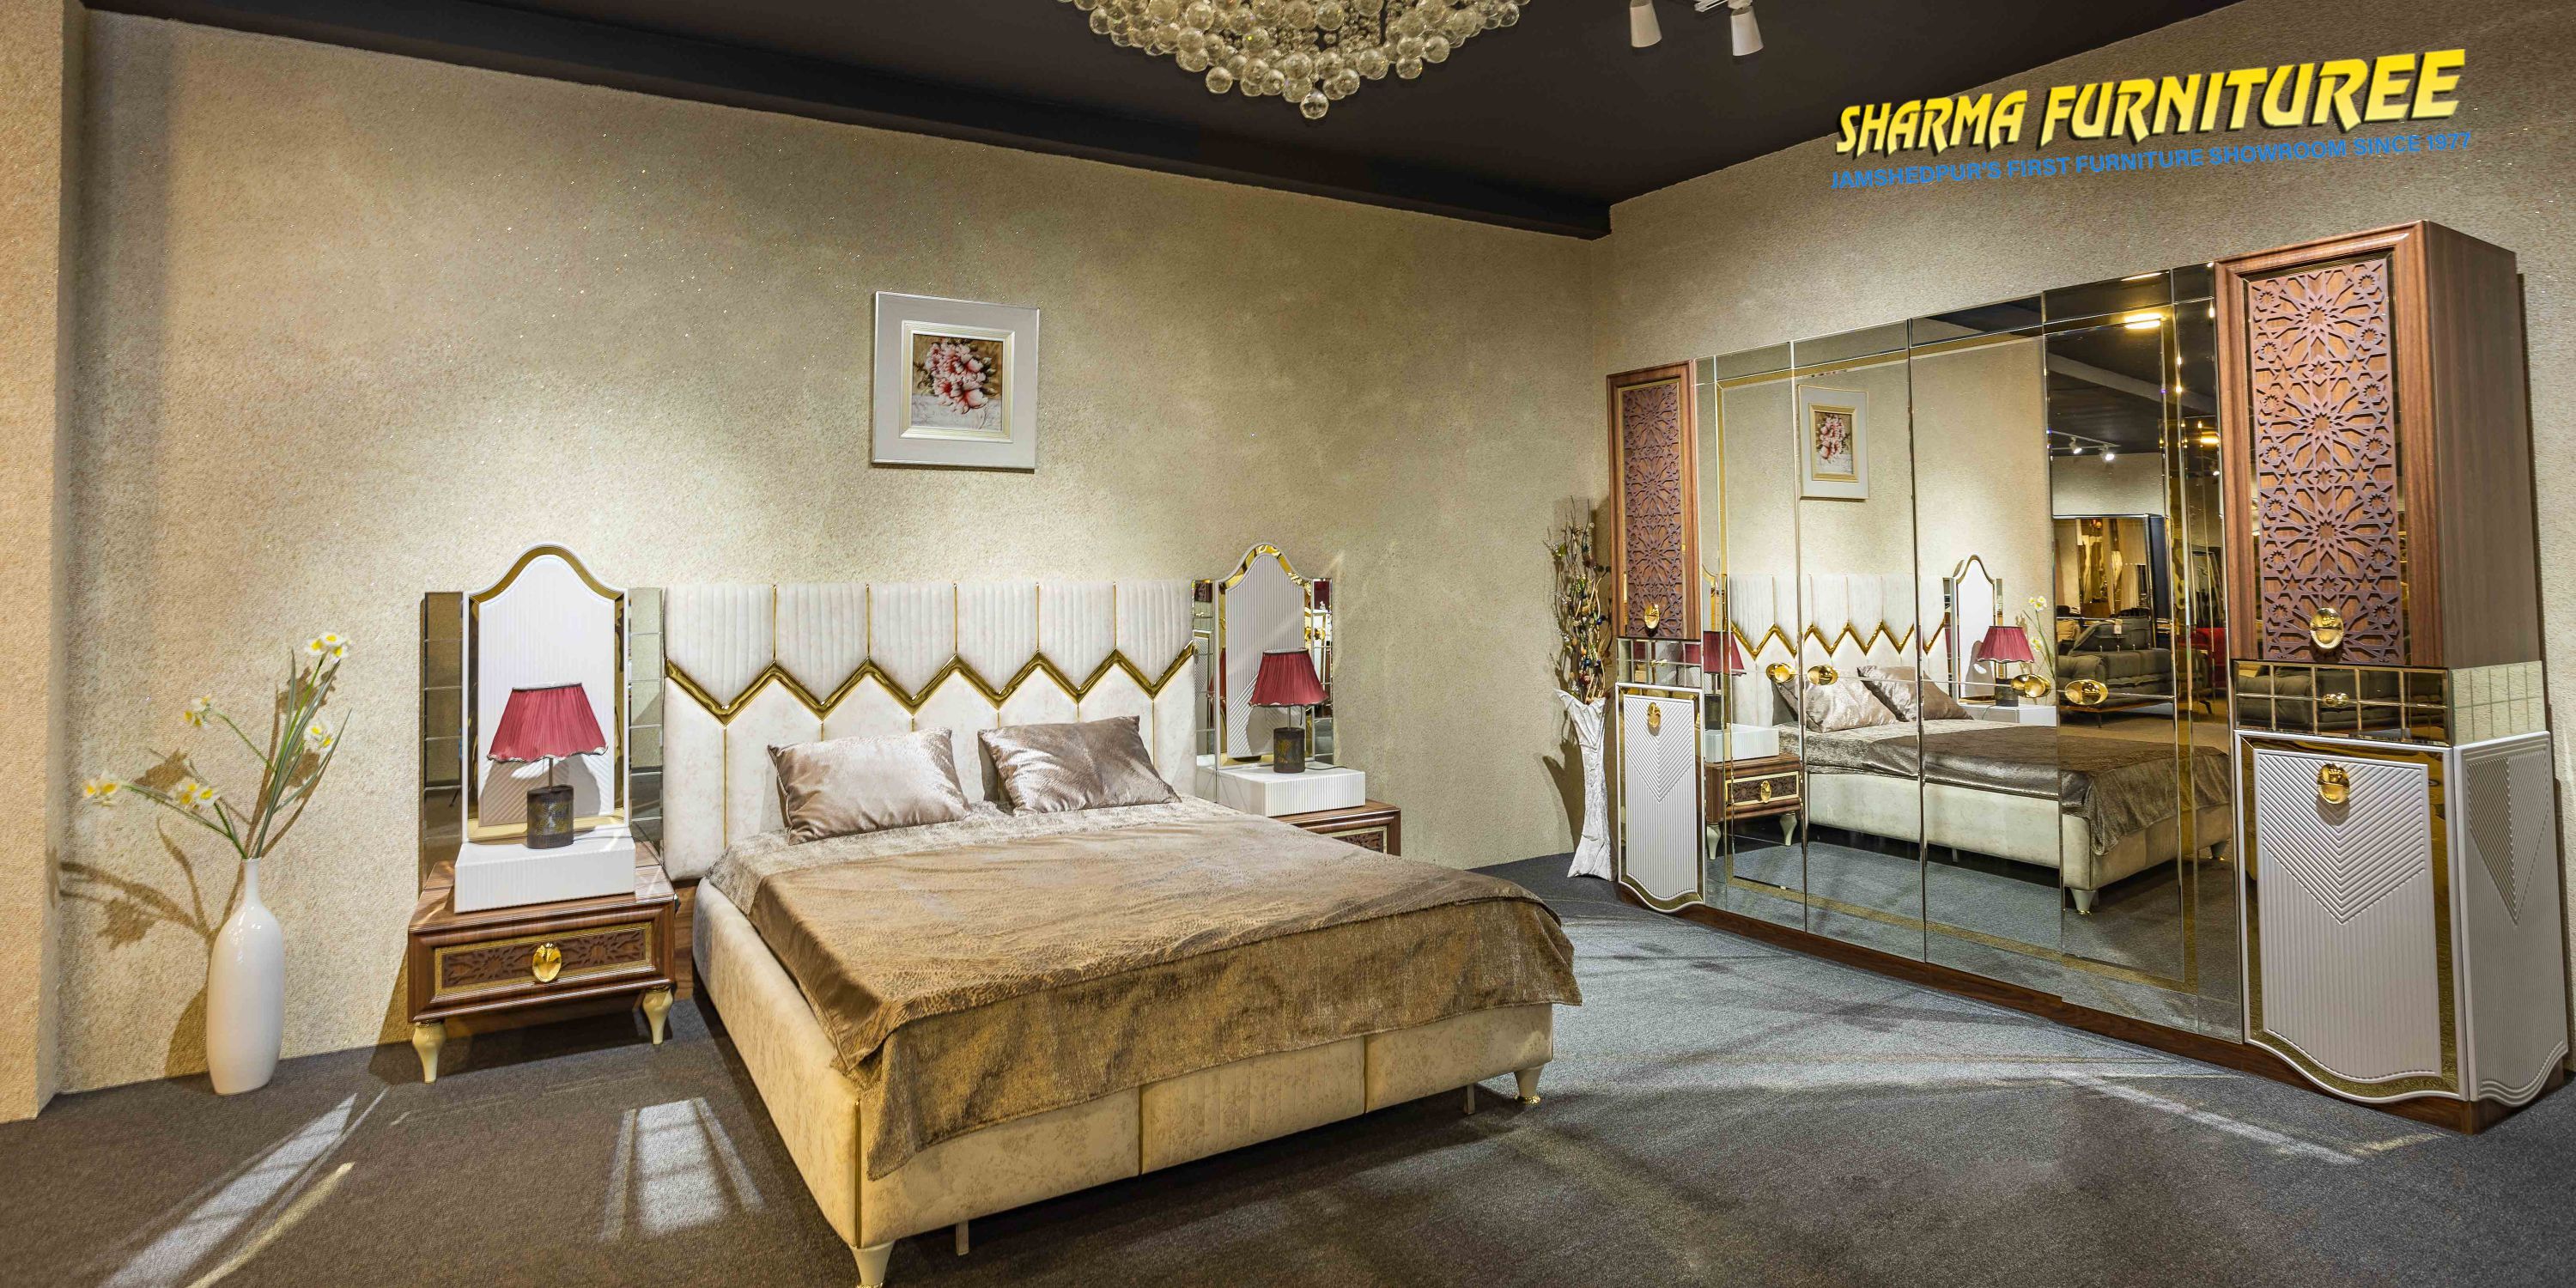 Modern Luxury King Size Beds With Storage At Sharma Furnituree